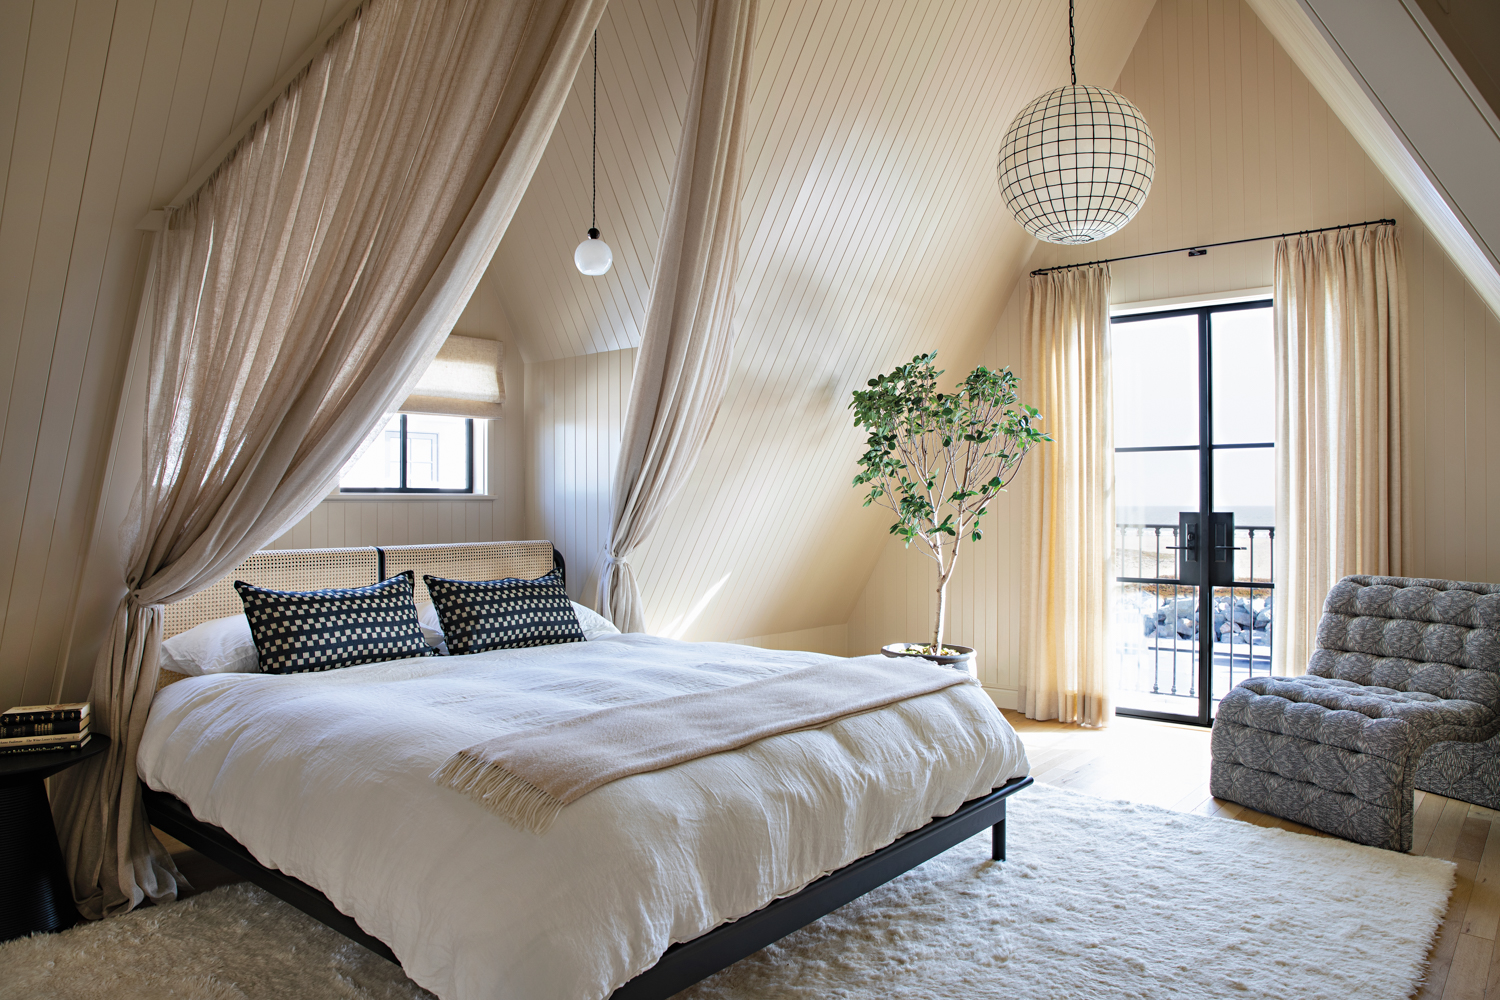 Bedroom with gabled ceilings, drapes...